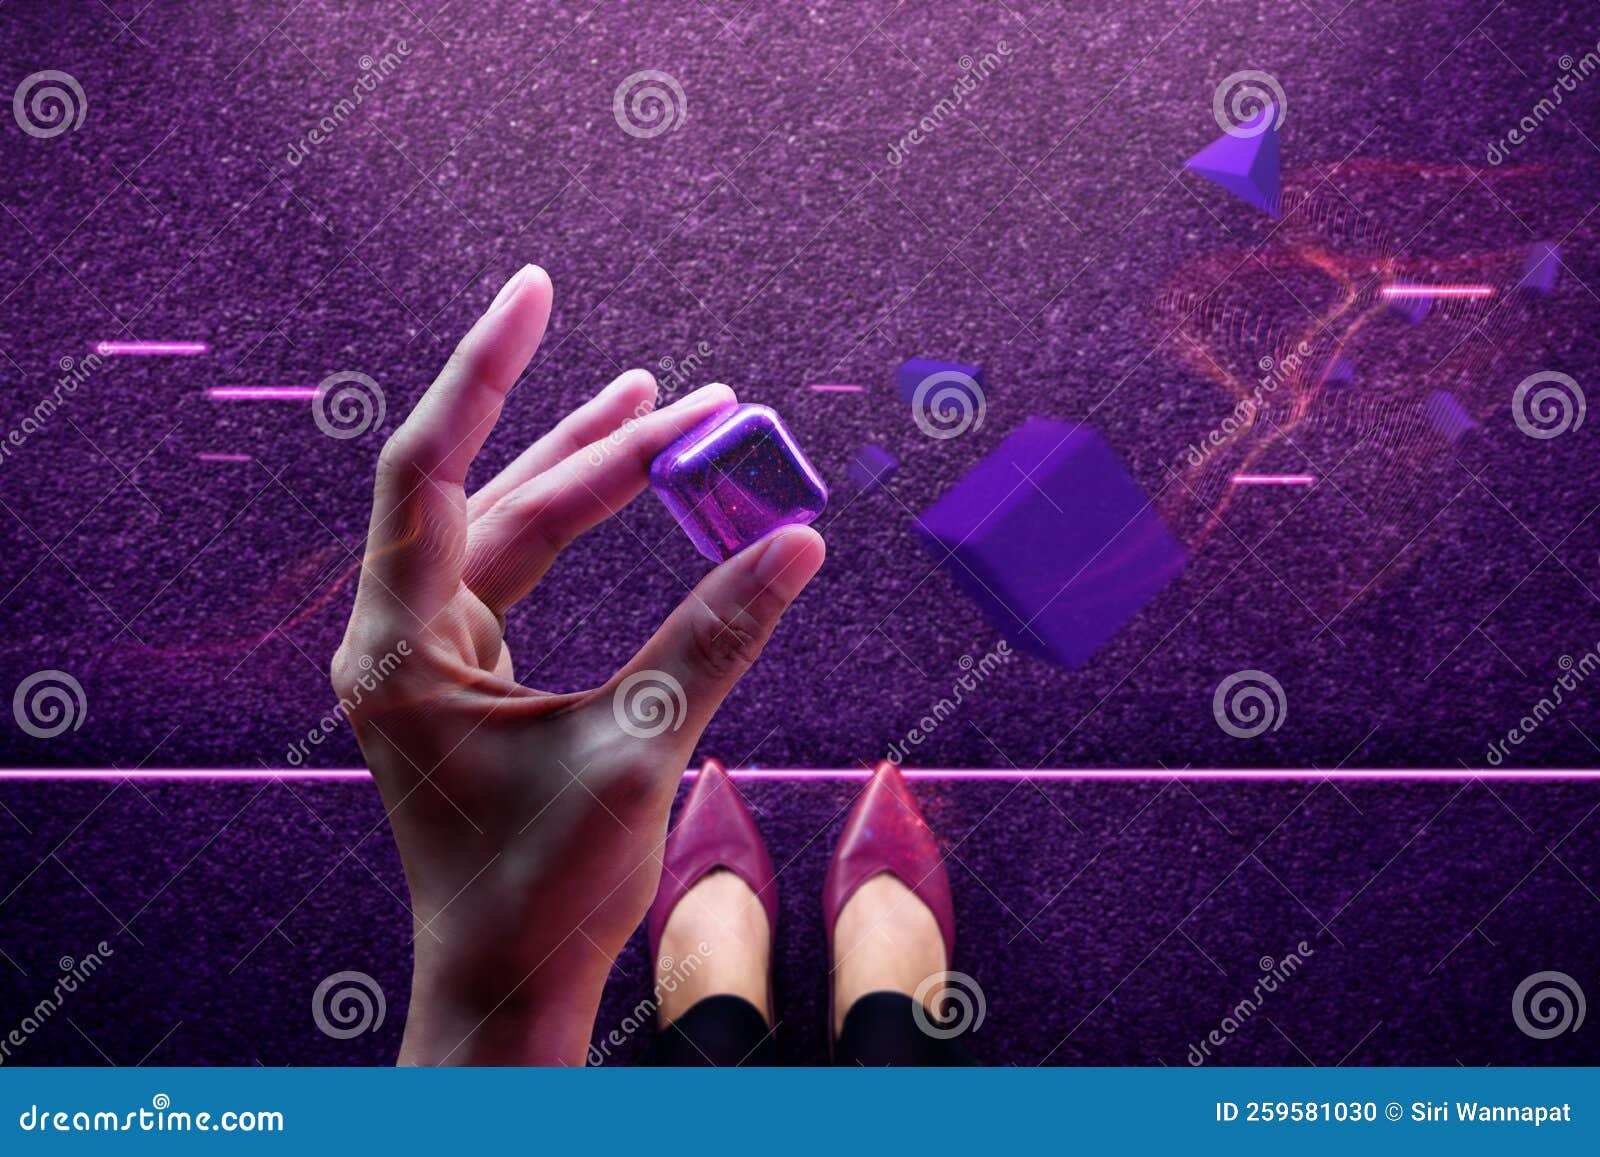 metaverse, web3 and blockchain technology . woman has a new experiences by touching a 3d object throght the virtual world